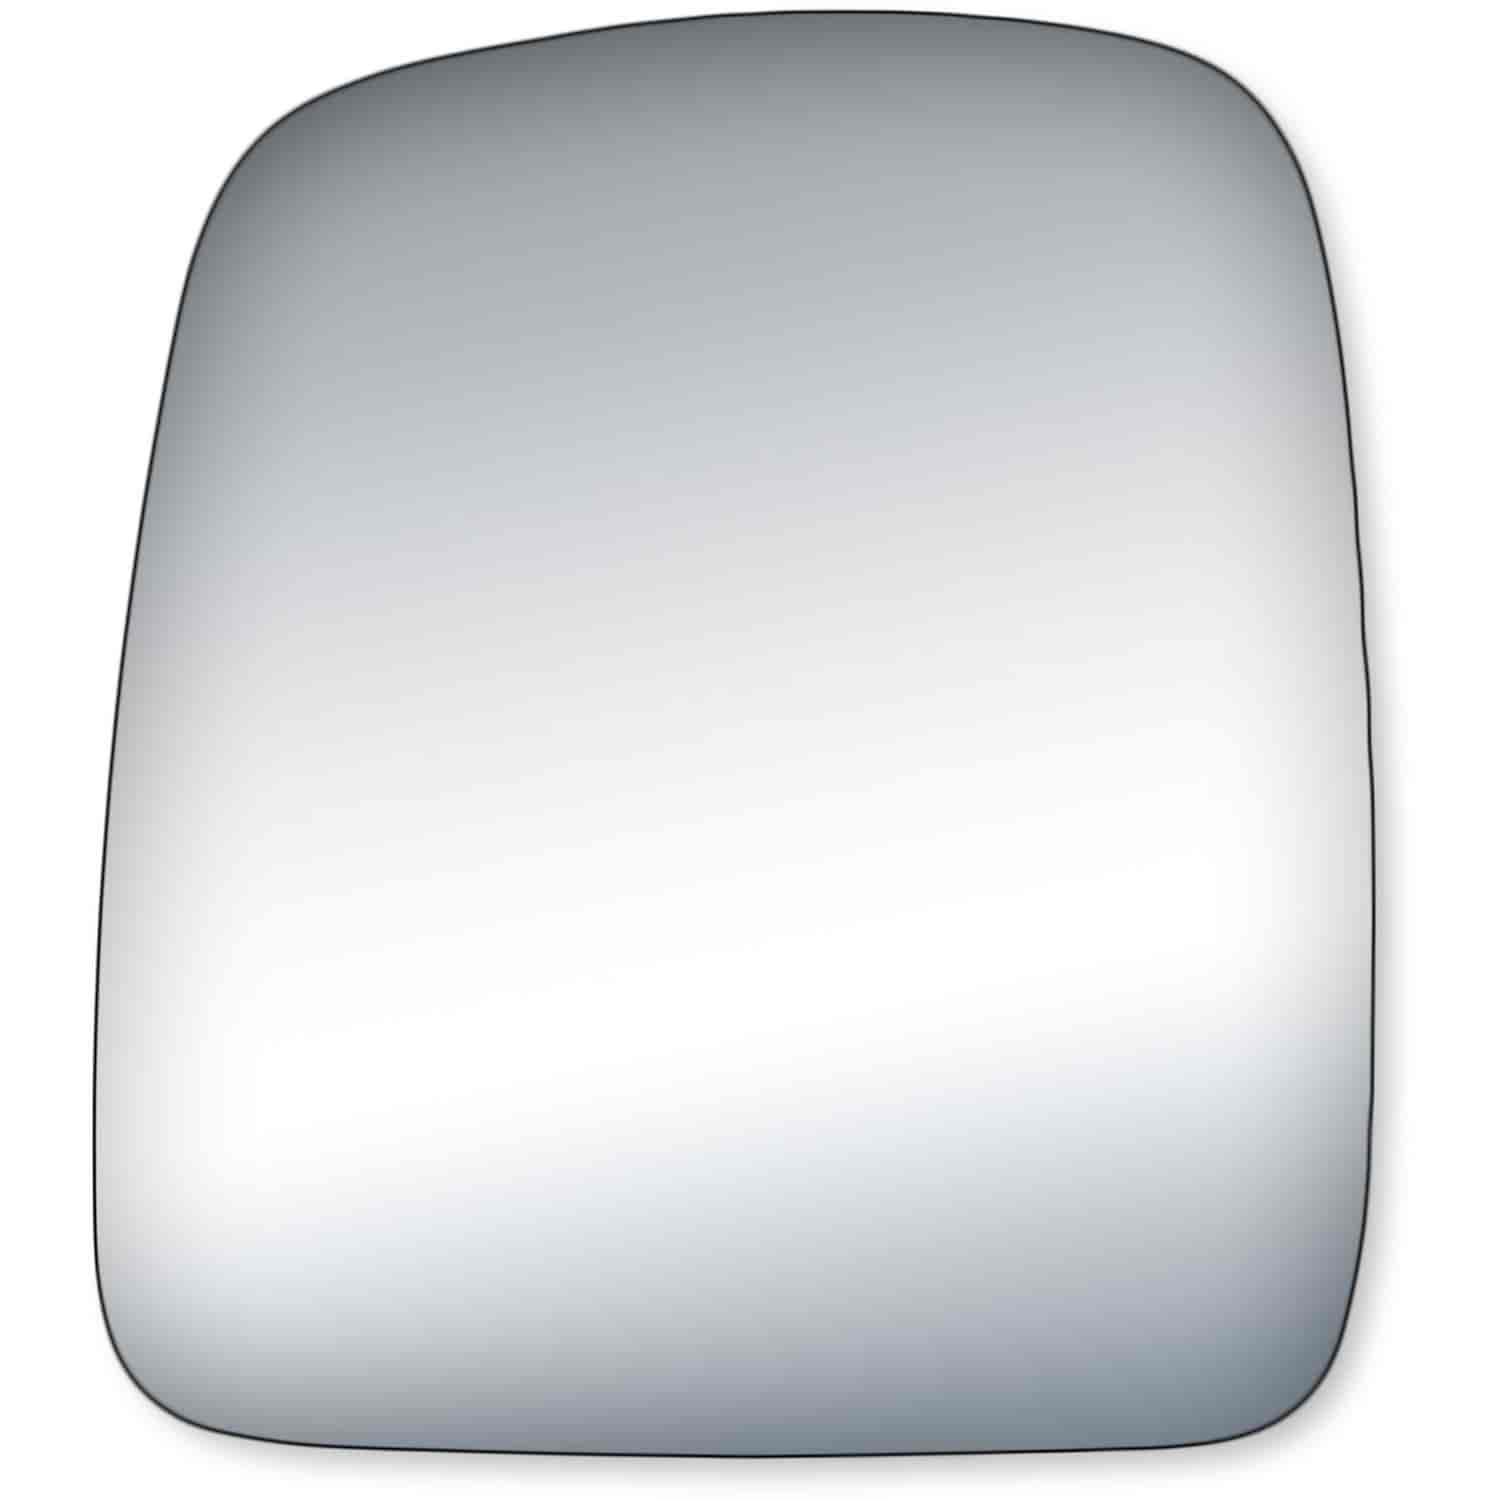 Replacement Glass for 03-07 Express Full Size Van; 03-07 Savana Full Size Van the glass measures 8 t